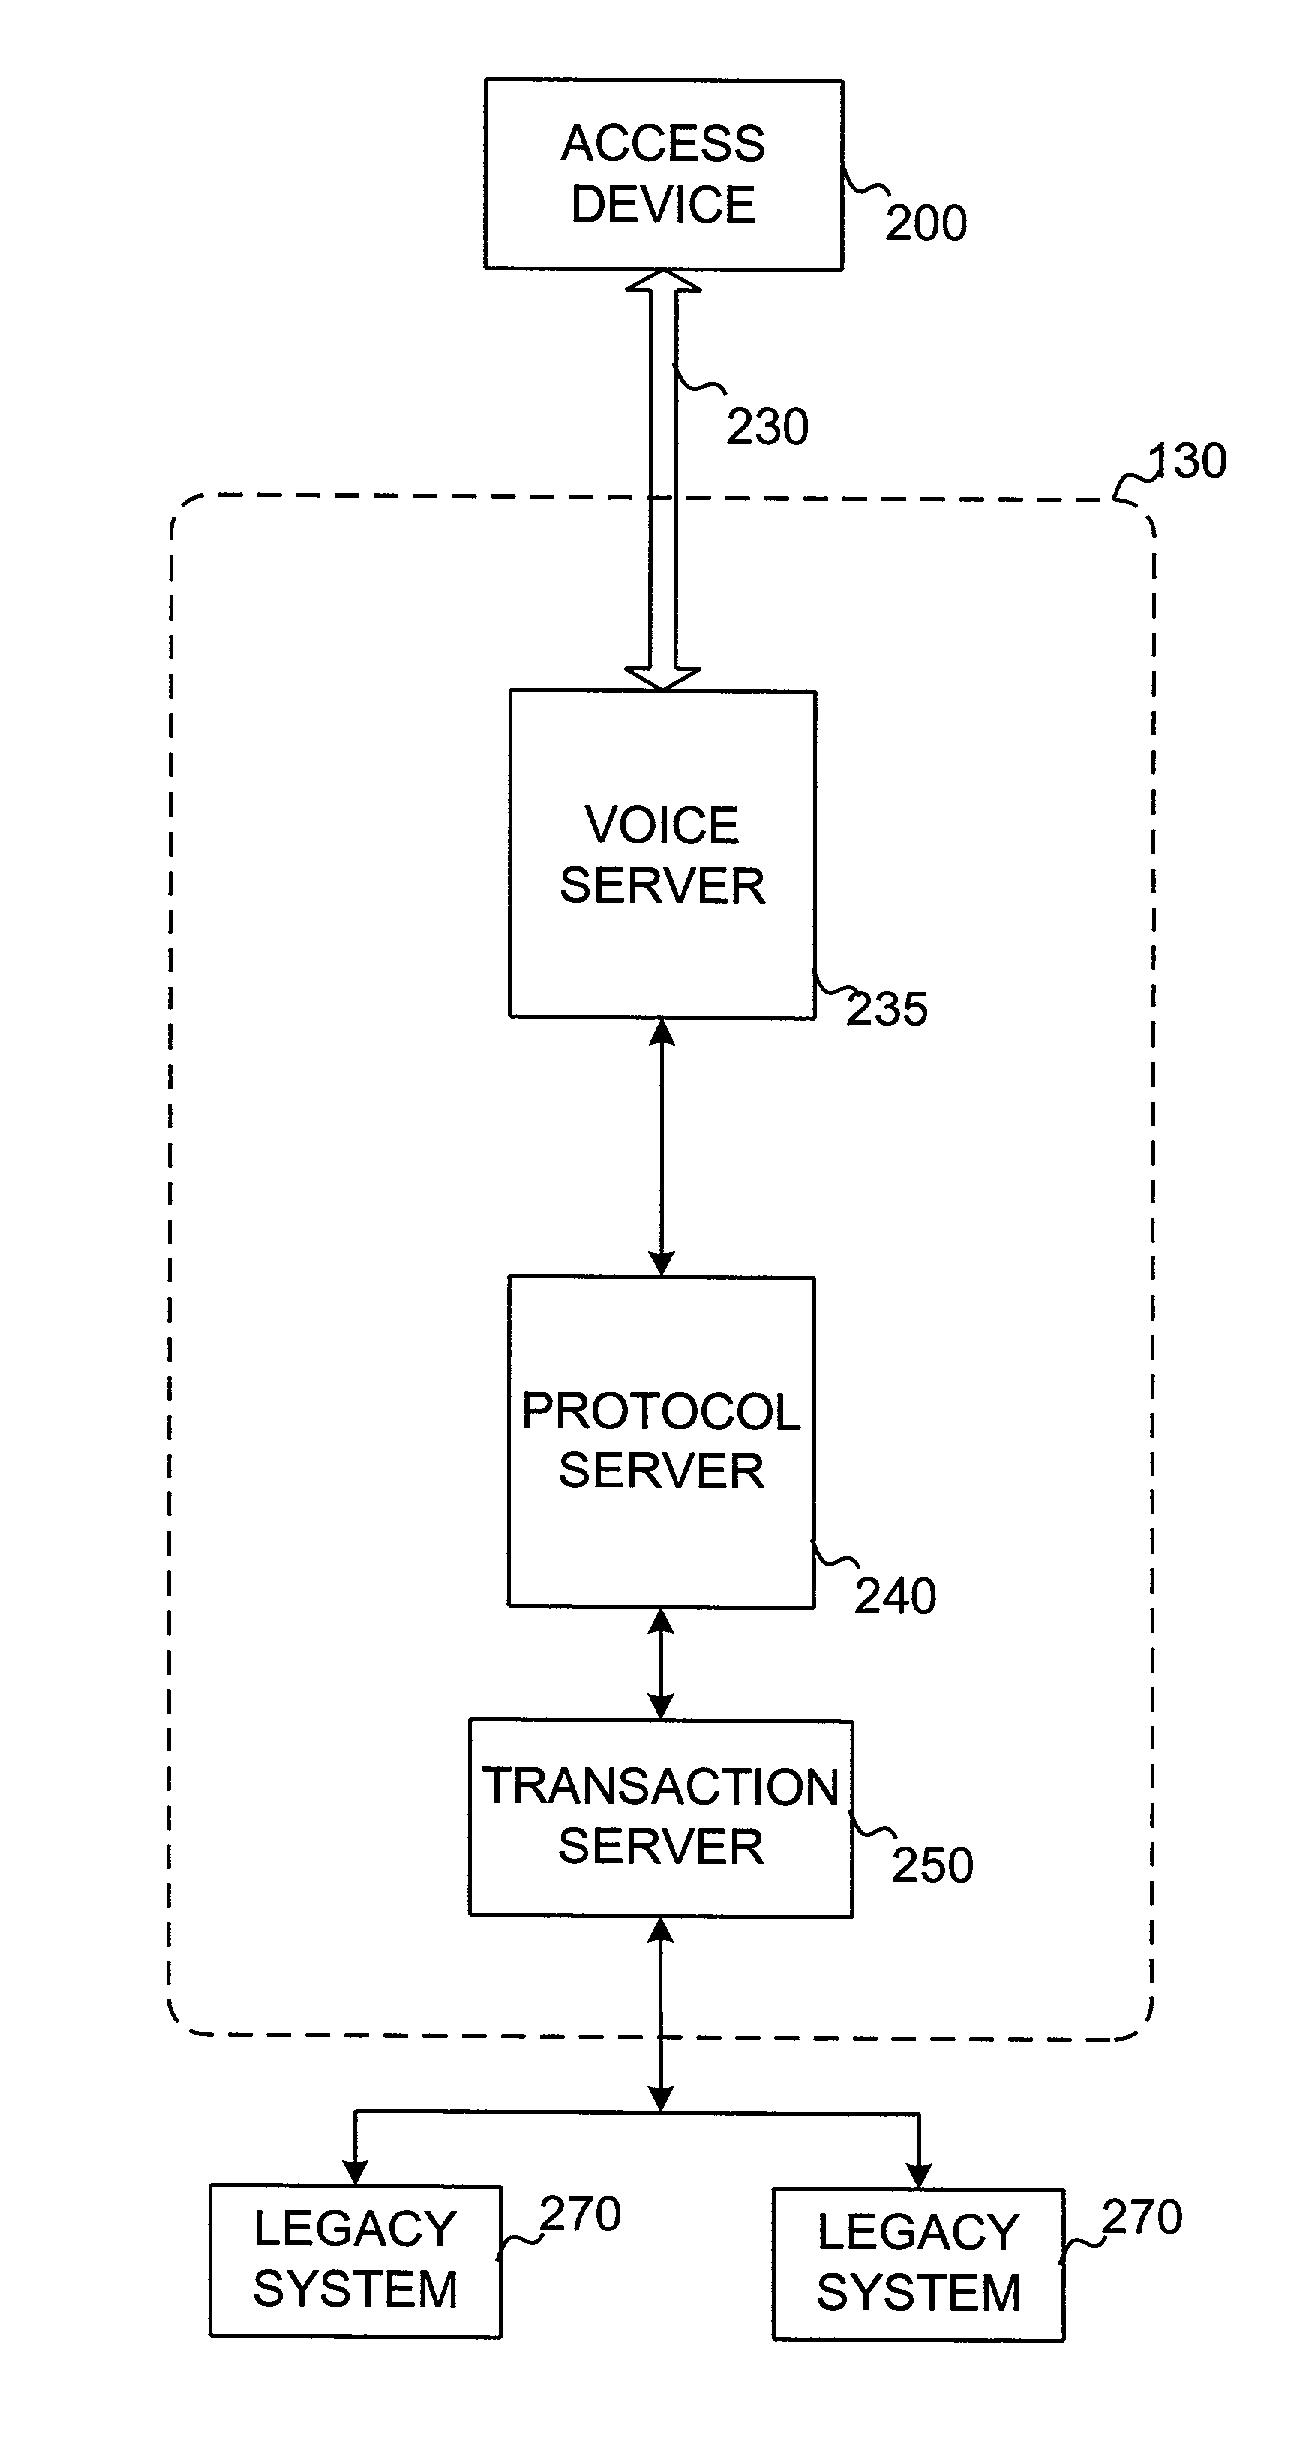 Voice recognition for performing authentication and completing transactions in a systems interface to legacy systems